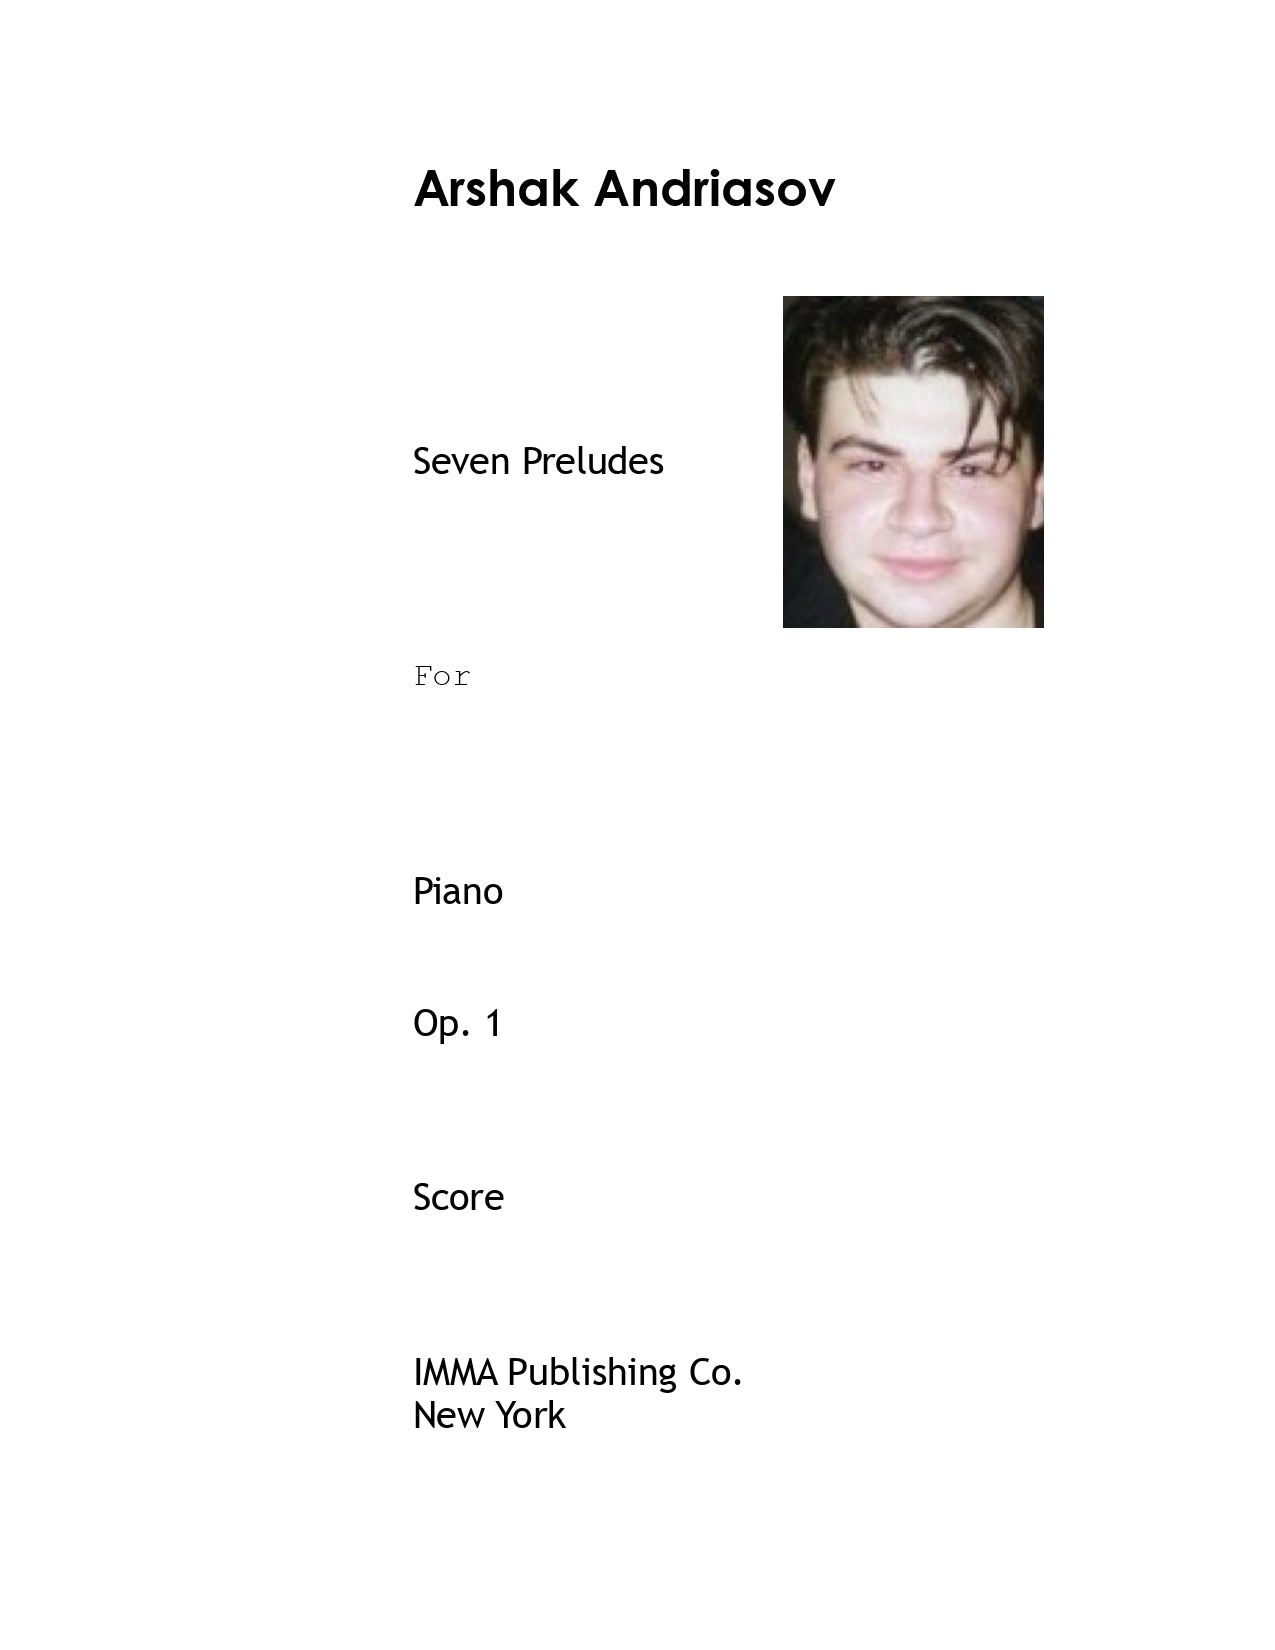 088. Arshak Andriasov: Seven Preludes, Op. 1 for Piano (PDF)